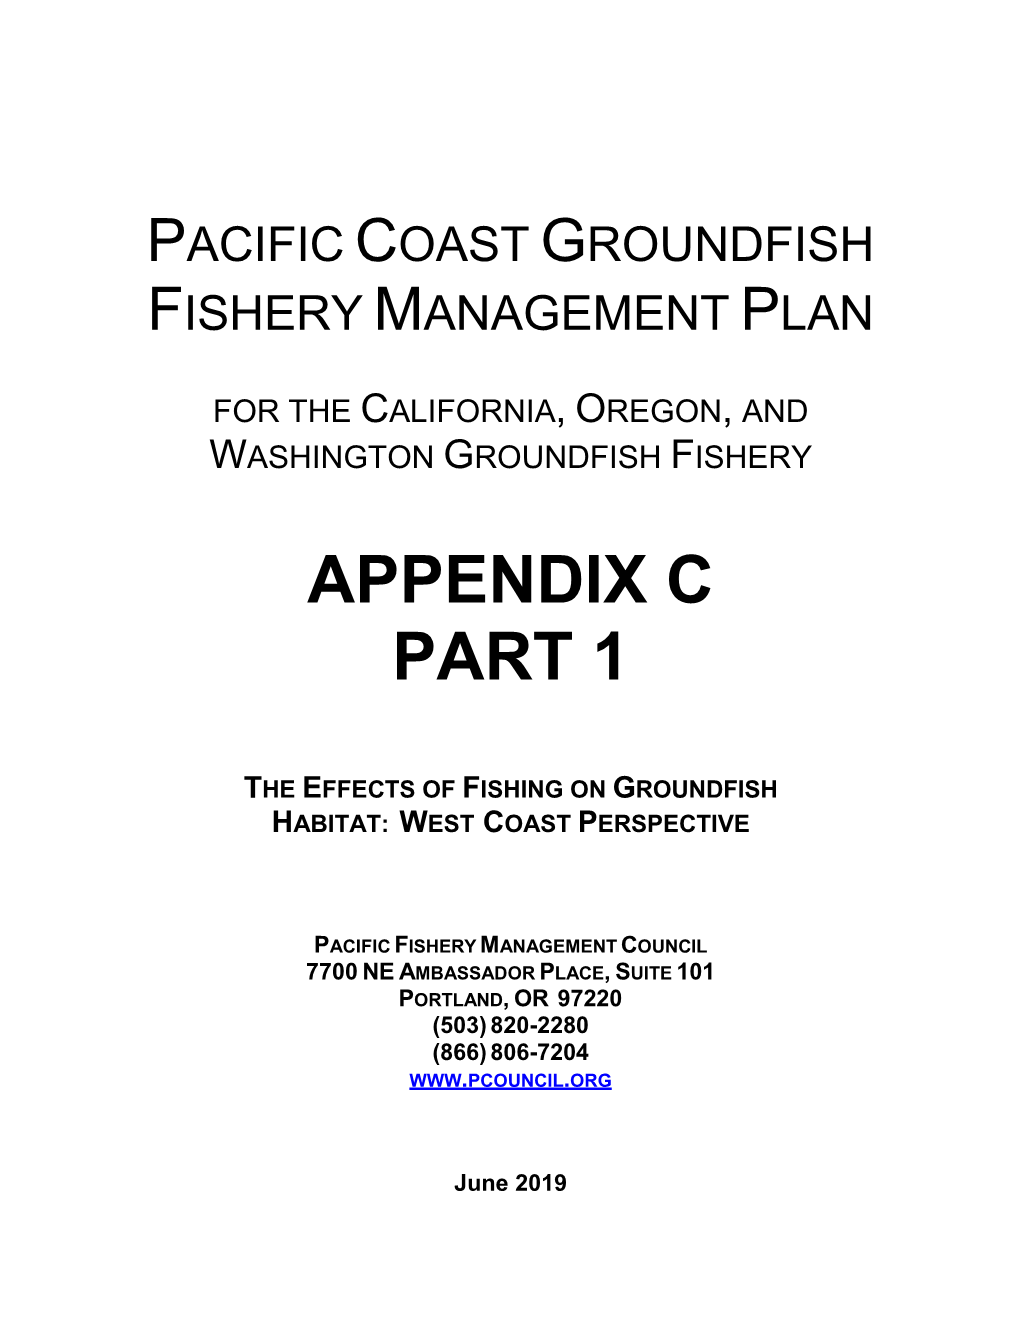 West Coast Perspective on Fishing Gear Impacts to Habitat